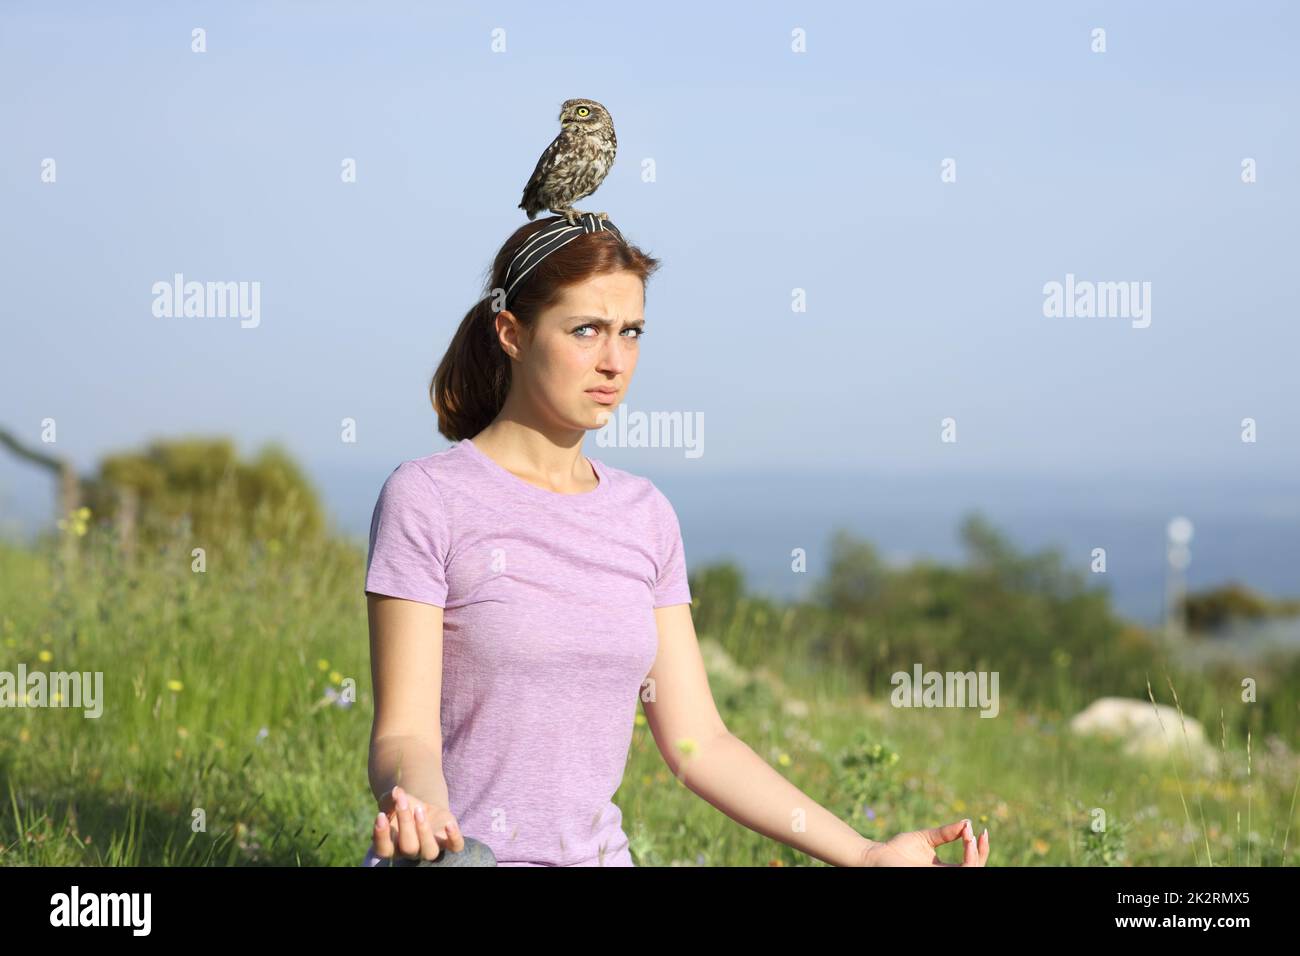 Yogi being distracted by a bird on her head Stock Photo